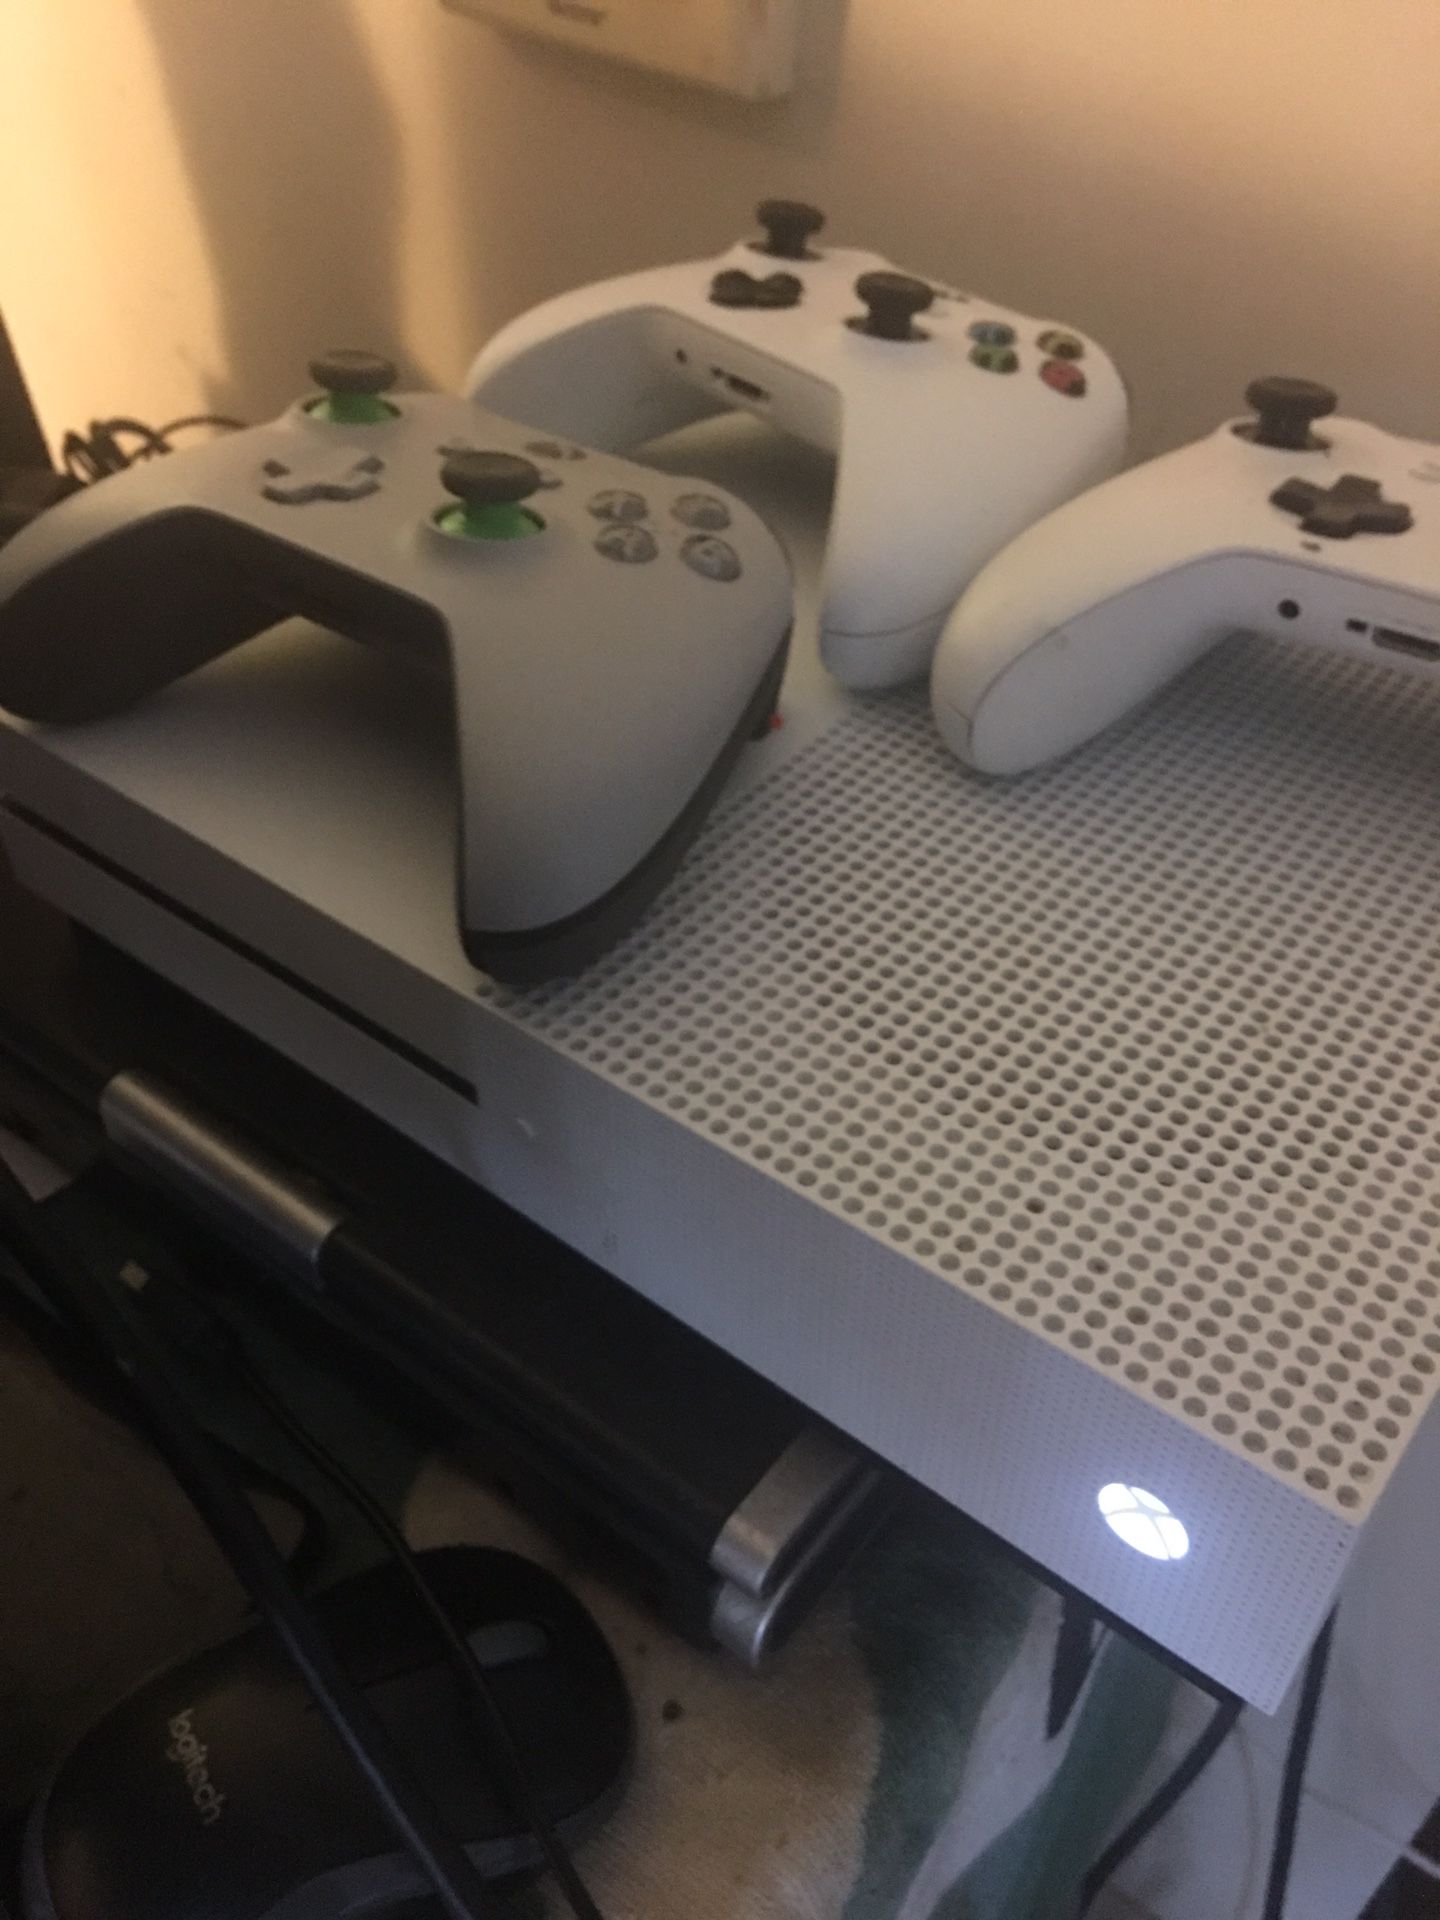 White 1tb Xbox One S With 2 controllers and 2 games